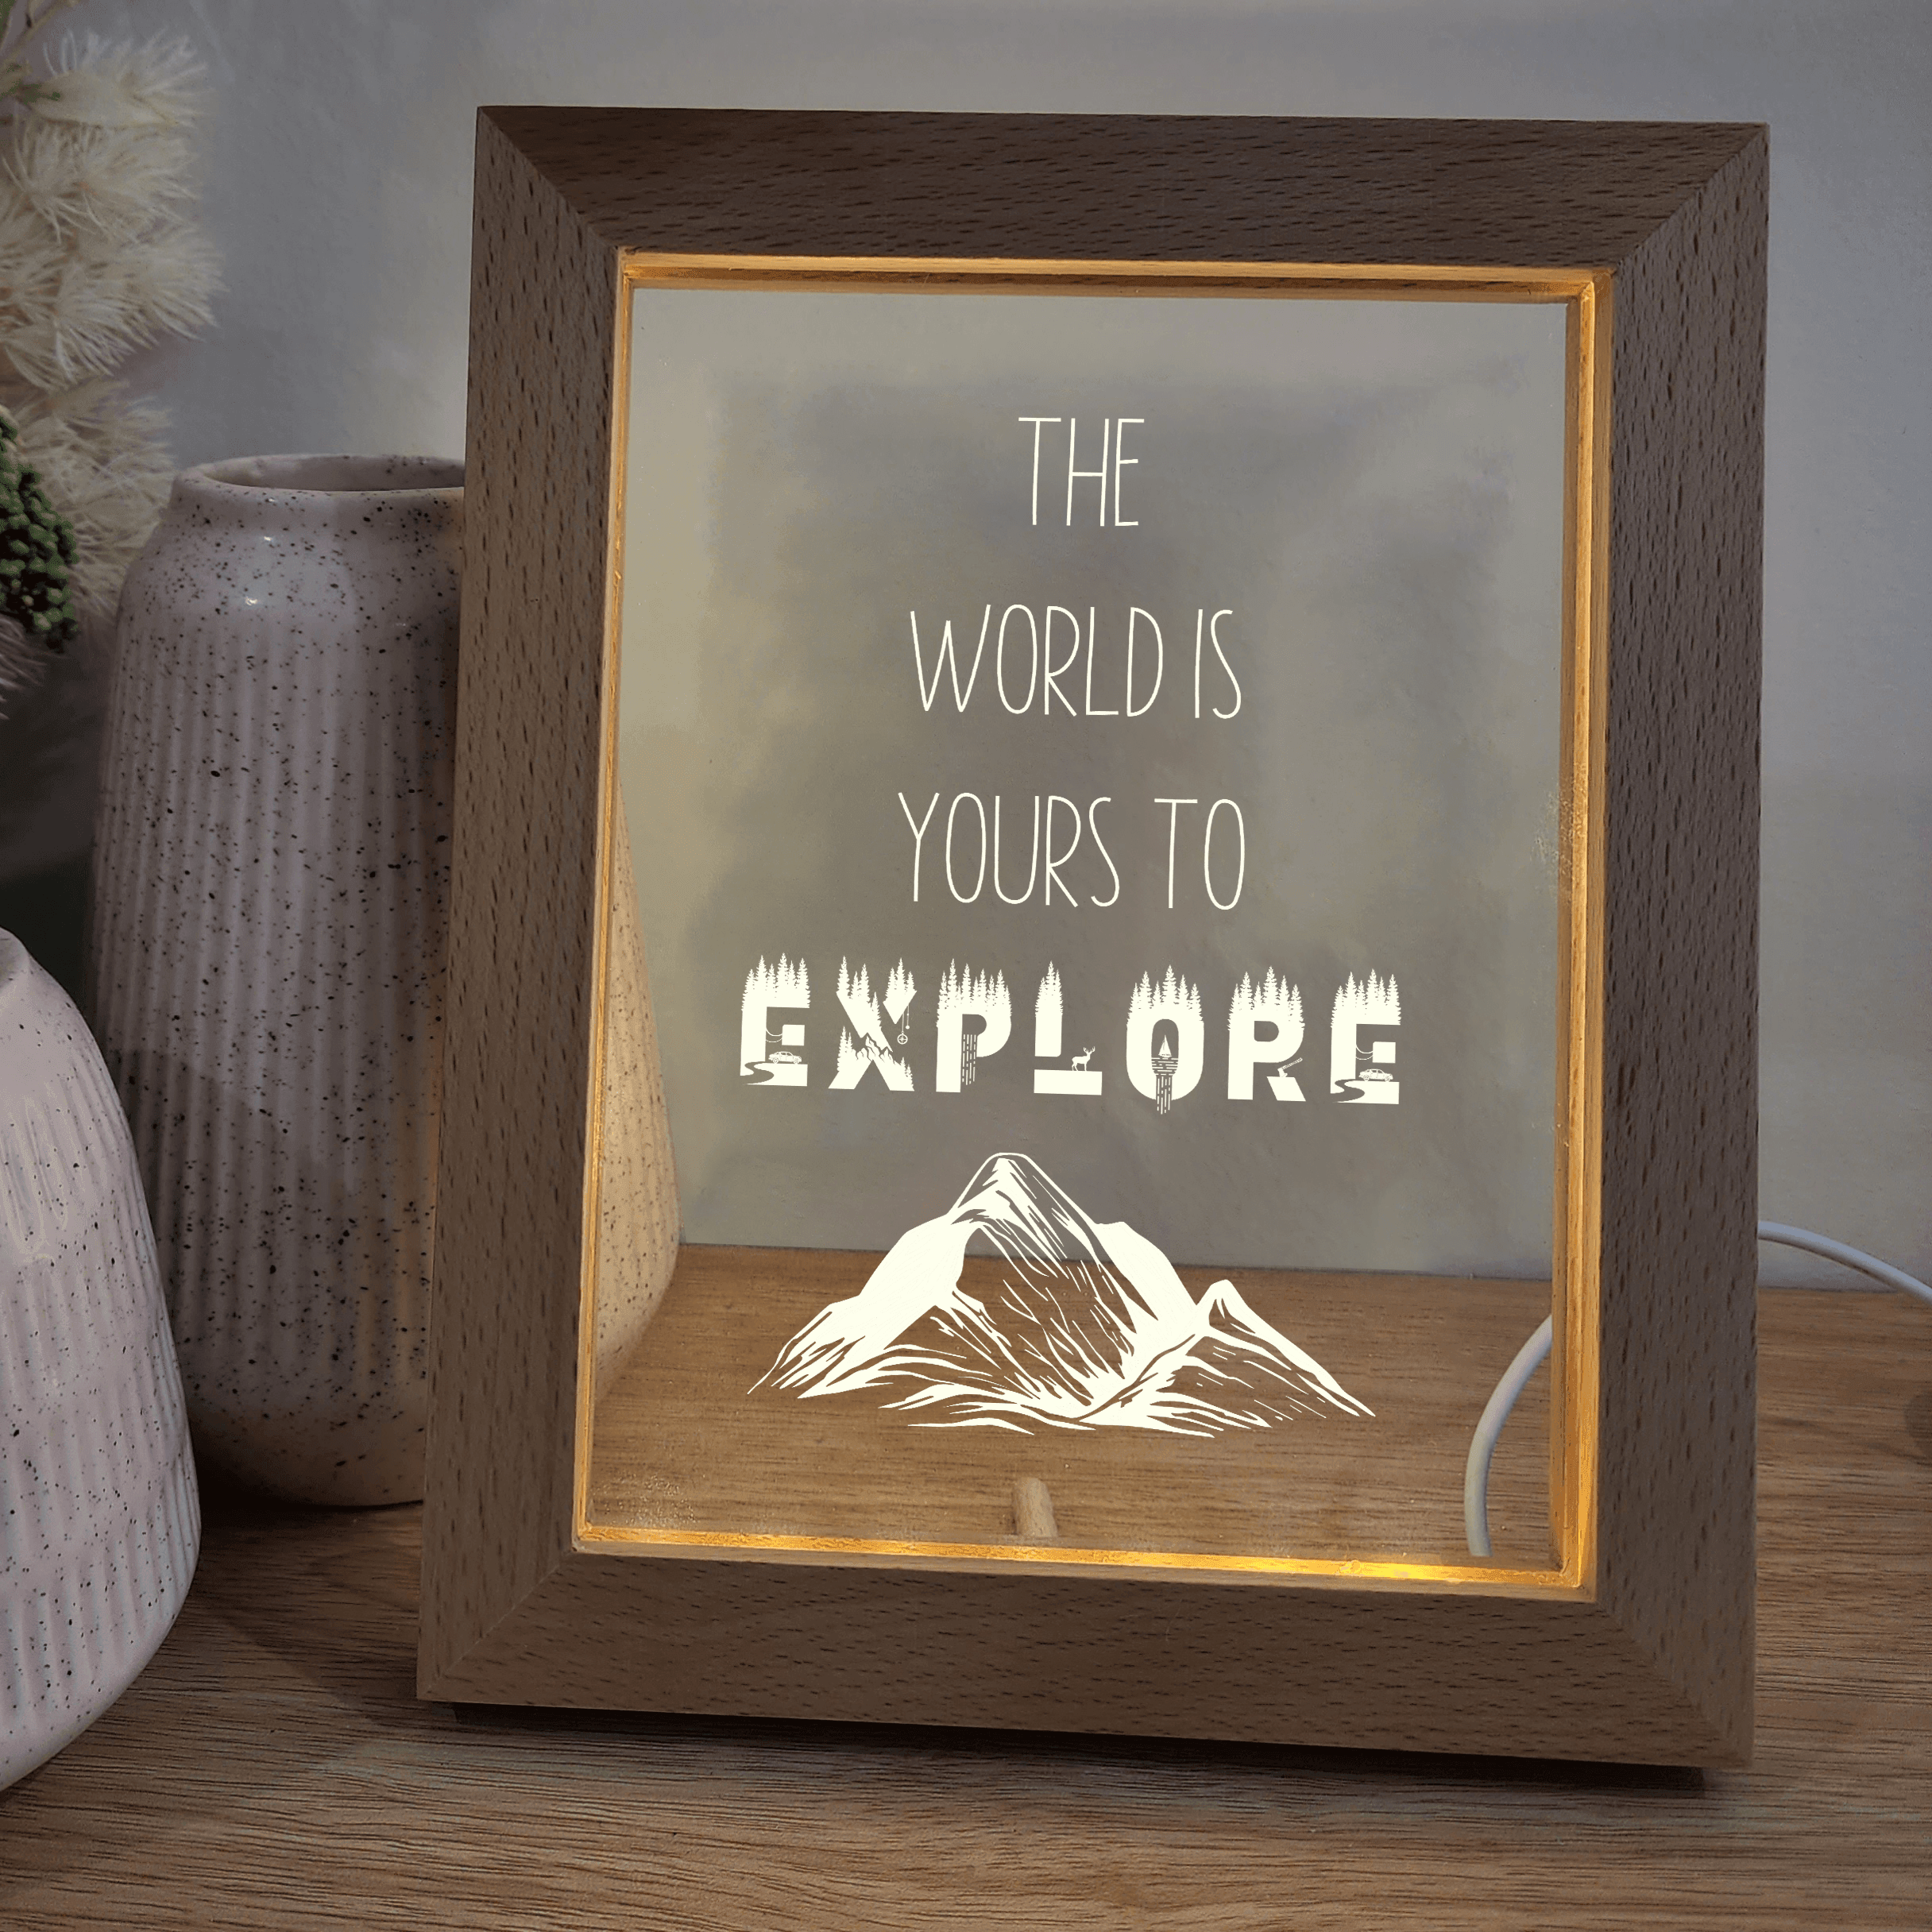 Timber Night Light Frame 🌙 - Quote - The World is Yours to Explore - The Willow Corner